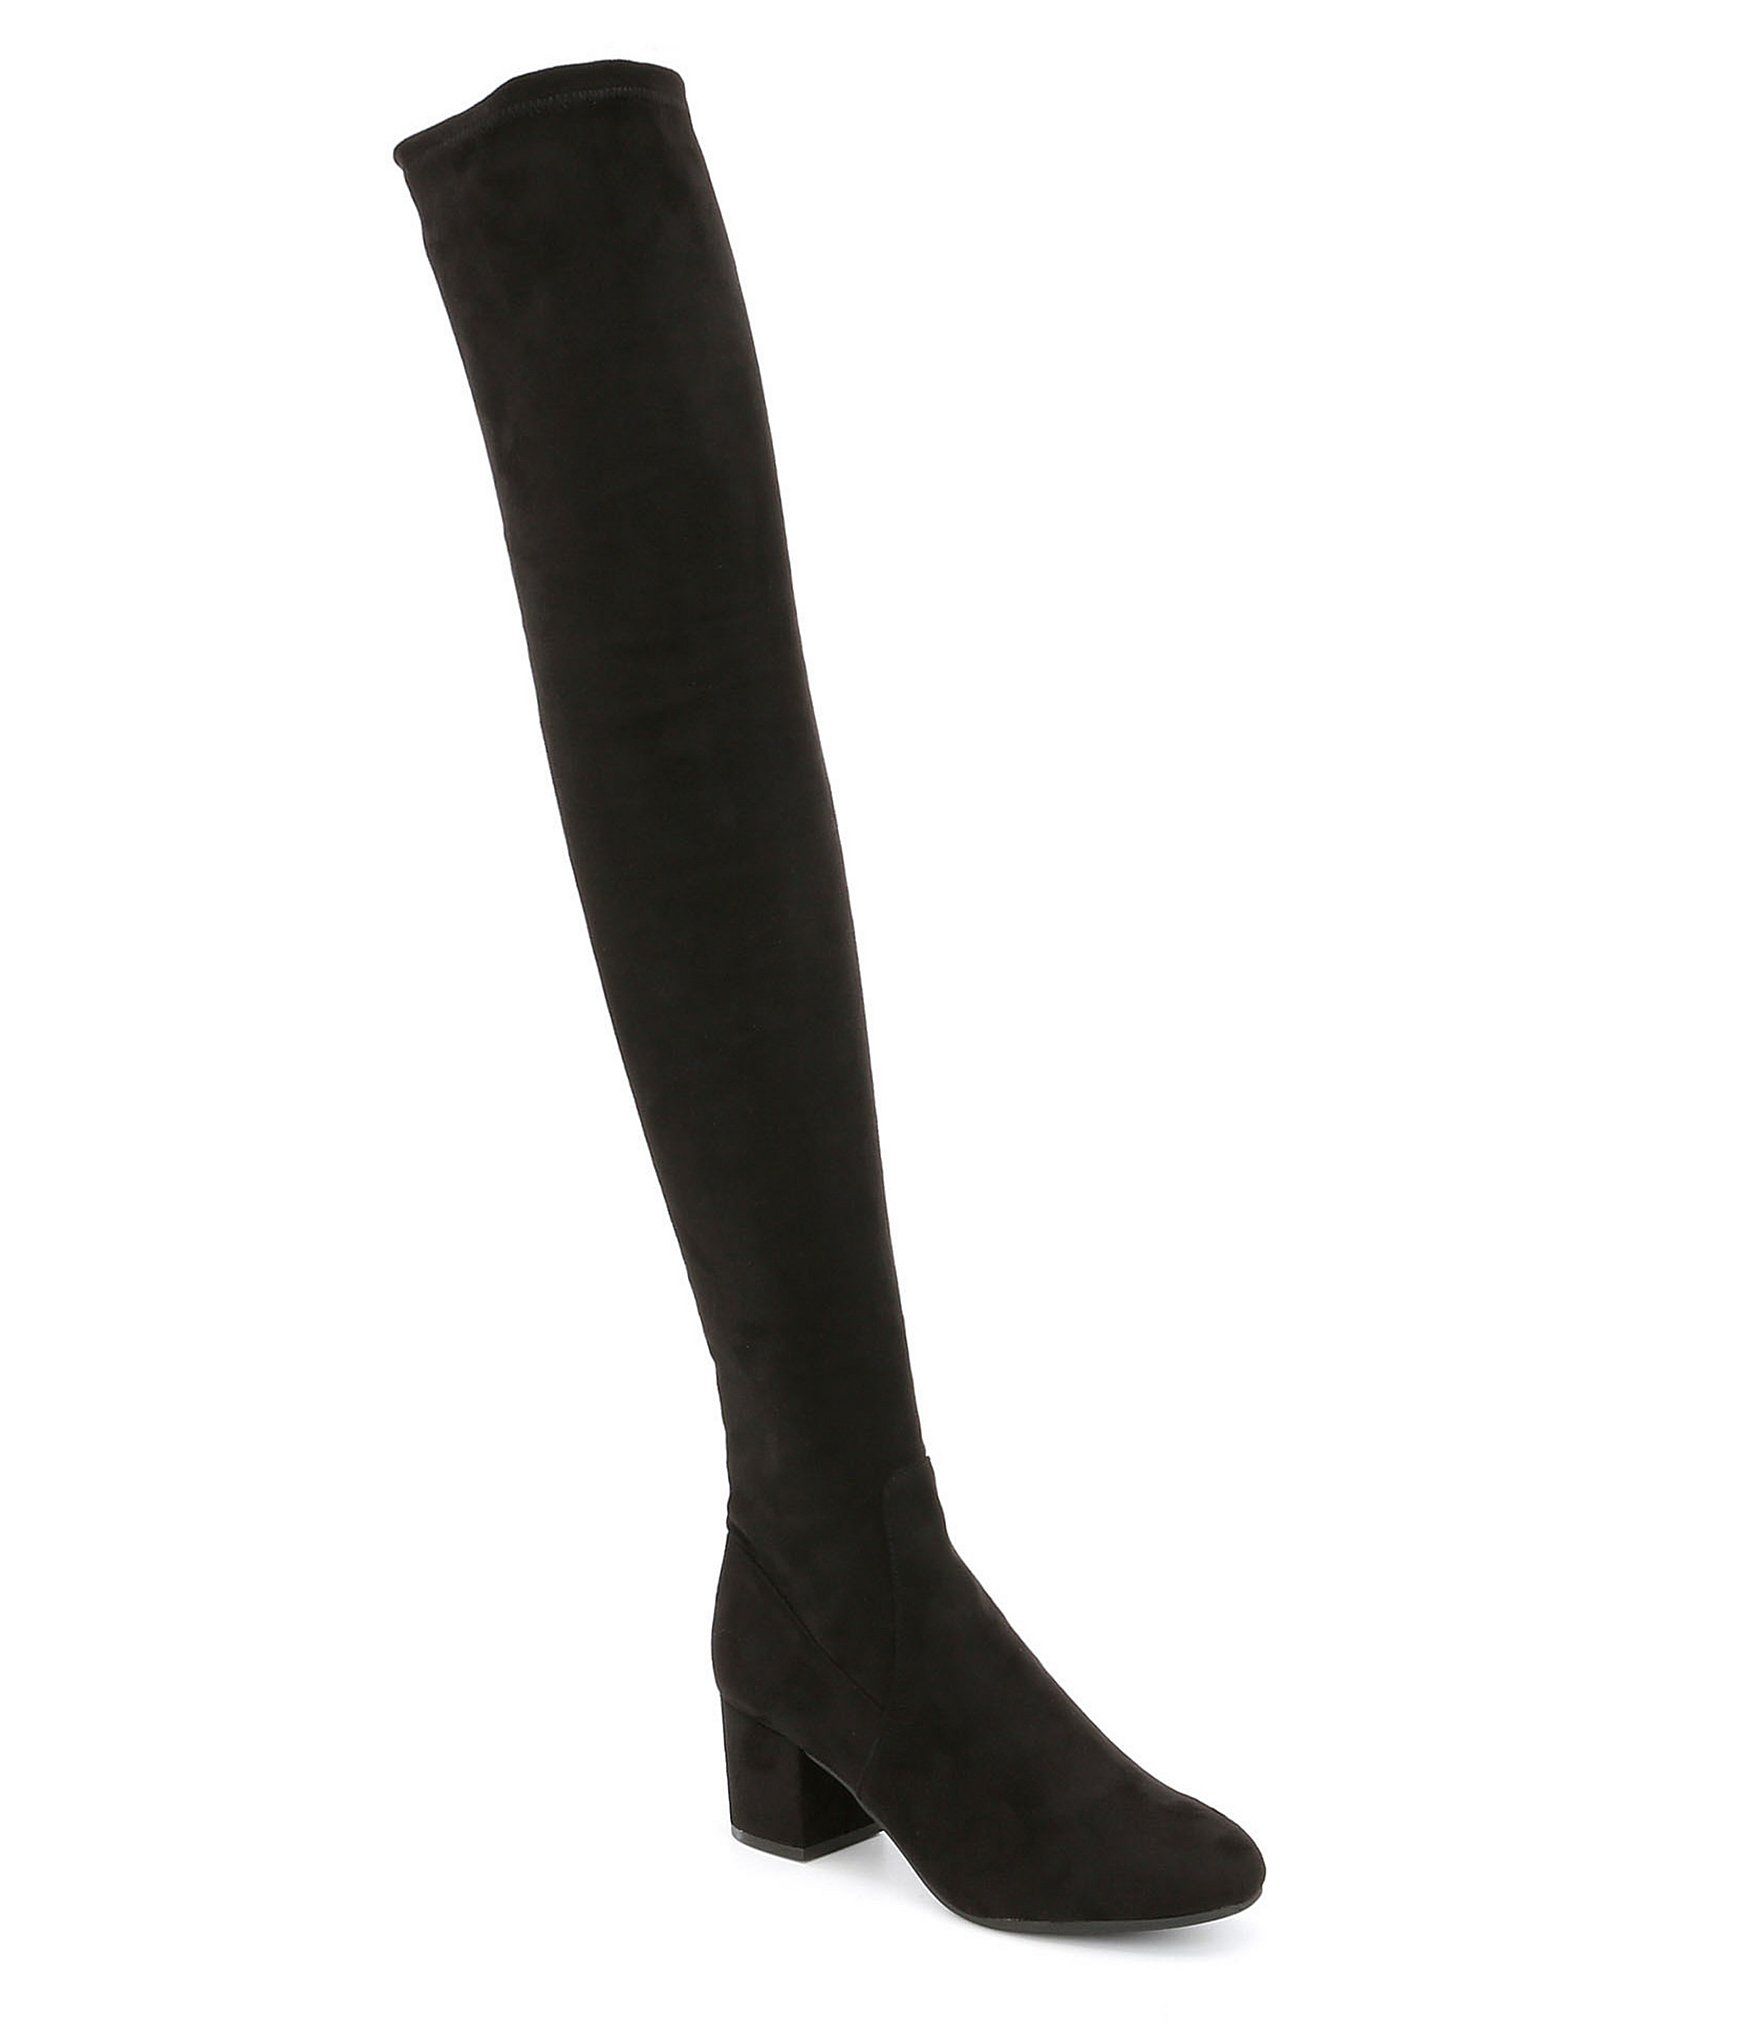 Steve Madden Isaac Microsuede Over The Knee Dress Boots | Dillards Inc.